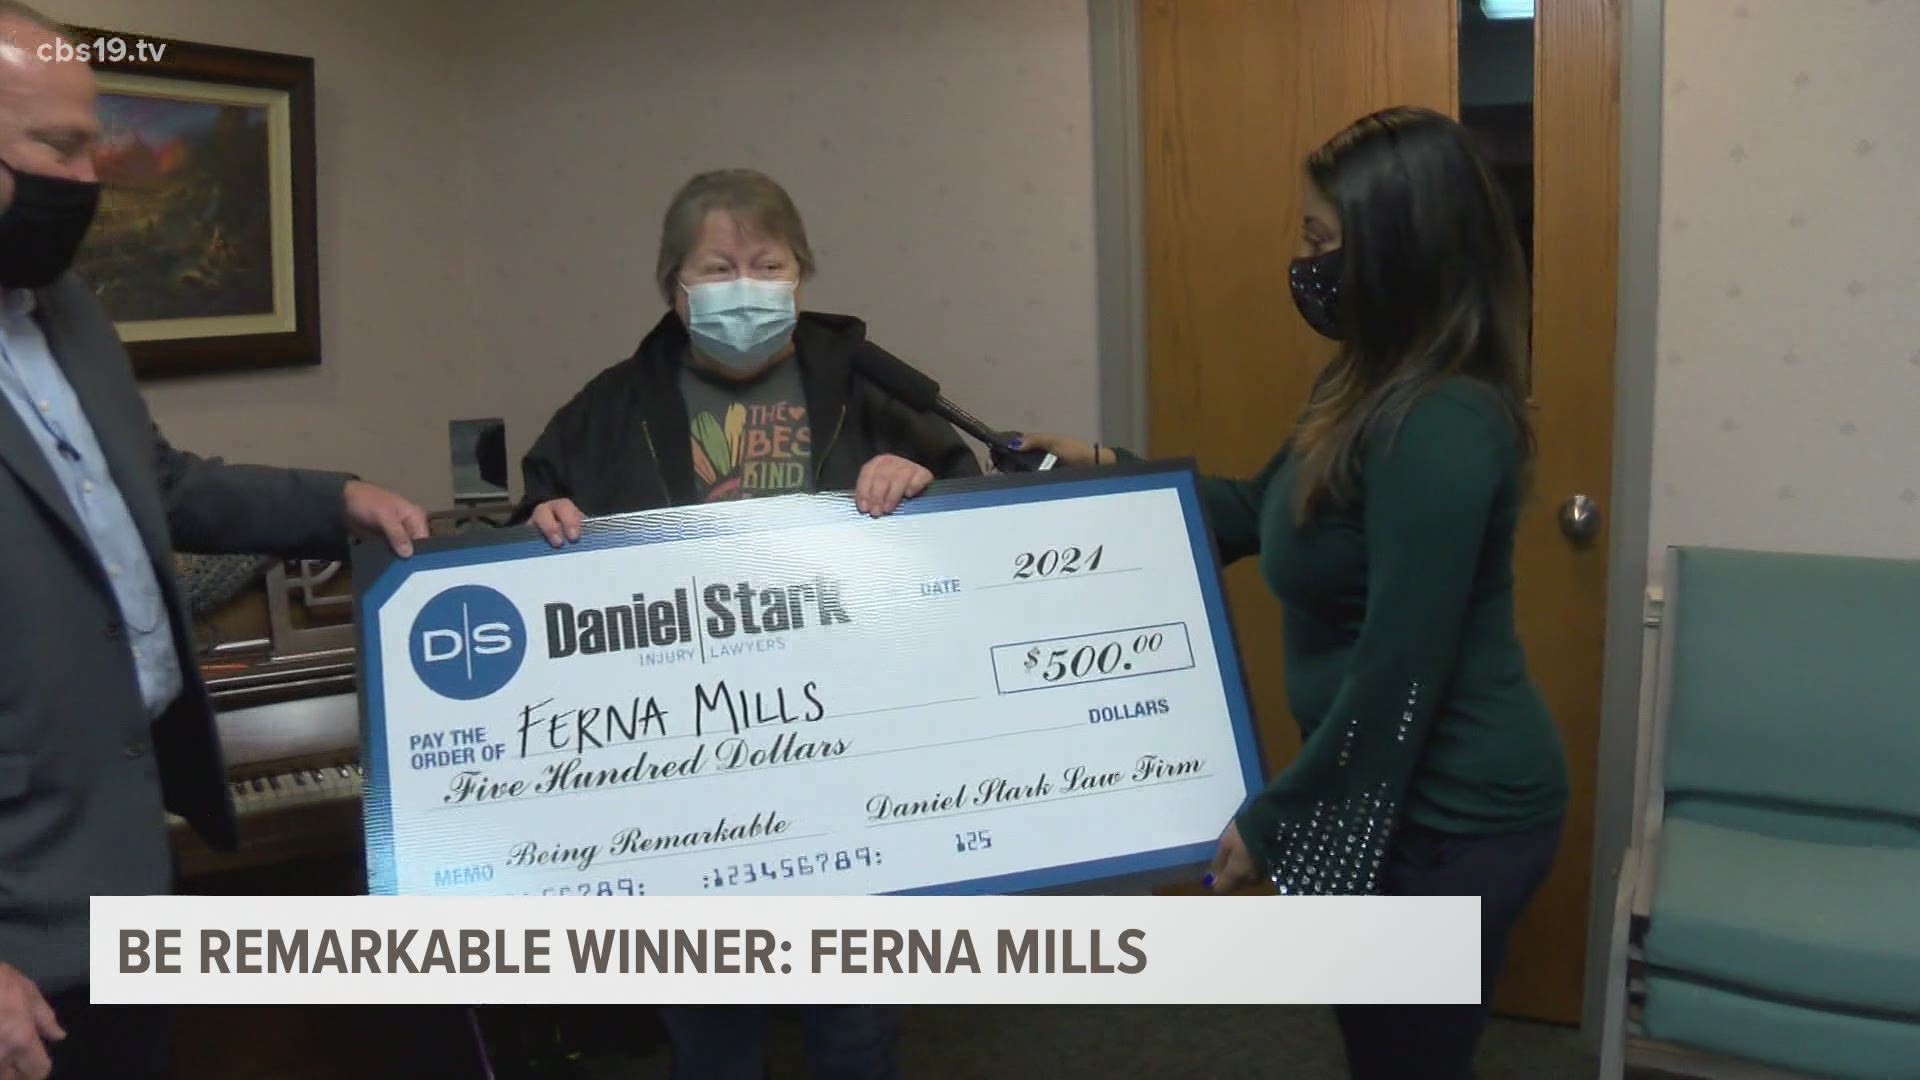 Ferna Mills is being honored for getting creative in making blankets and pillows for the homeless.